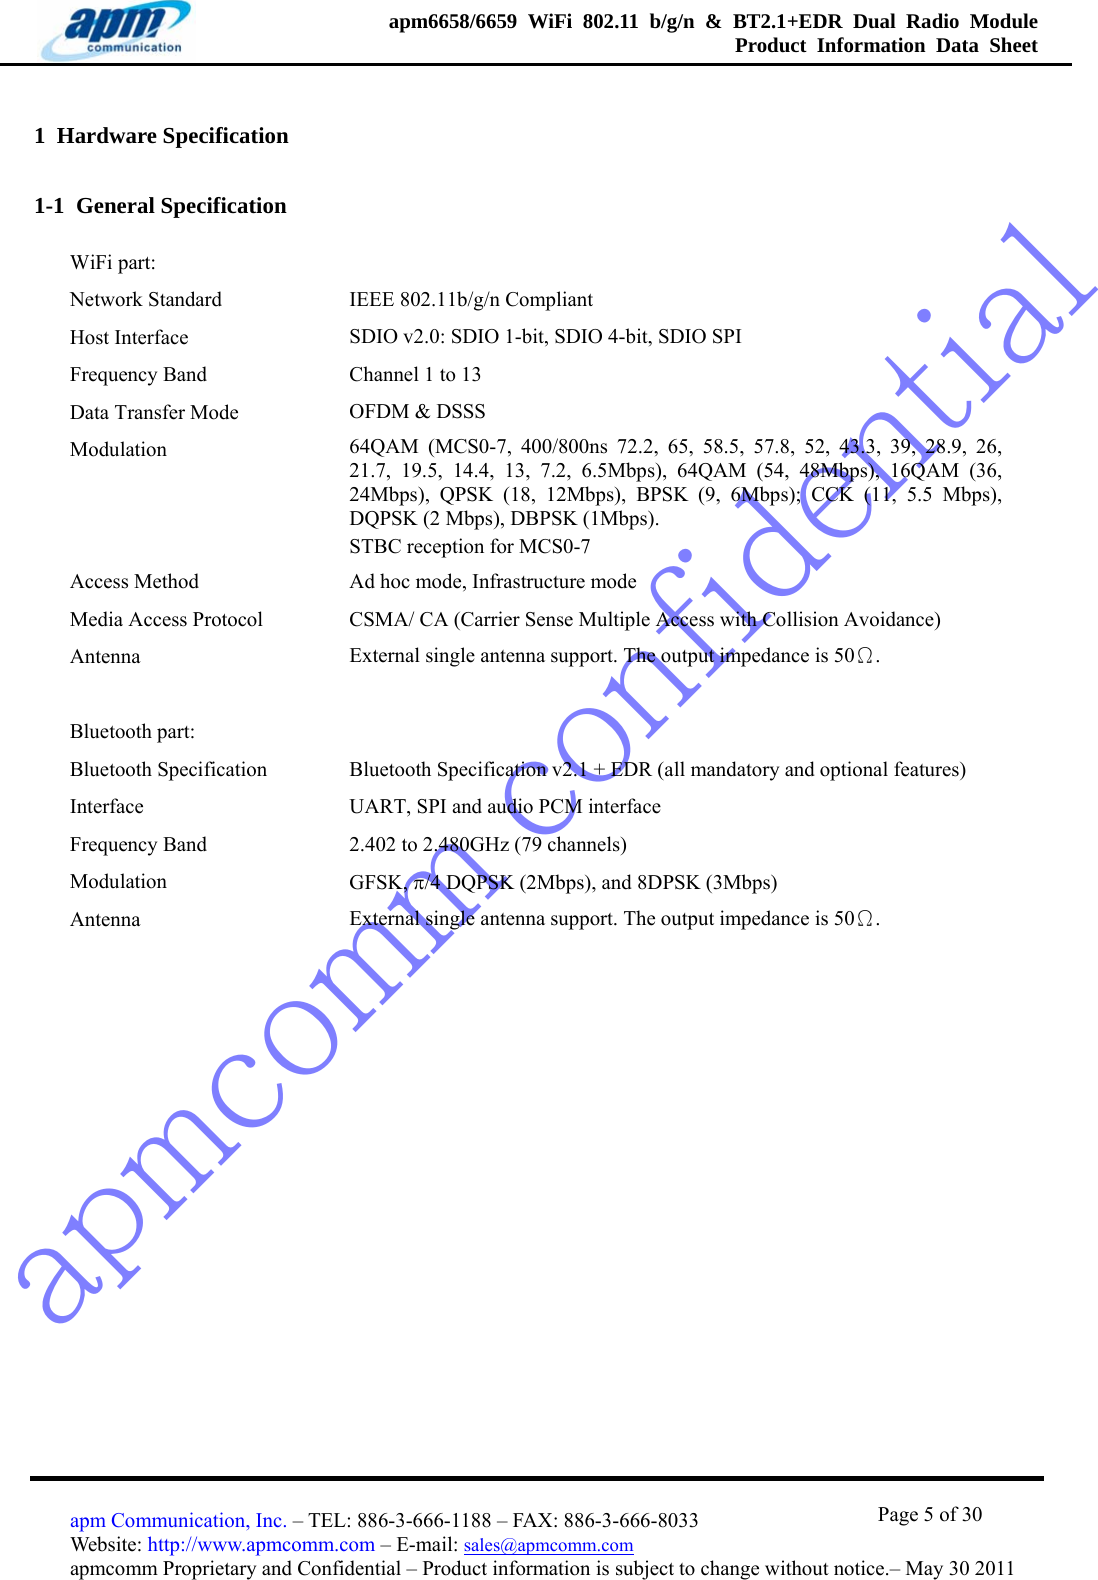 apmcomm confidentialapm6658/6659 WiFi 802.11 b/g/n &amp; BT2.1+EDR Dual Radio Module  Product Information Data Sheet                                       Page 5 of 30 apm Communication, Inc. – TEL: 886-3-666-1188 – FAX: 886-3-666-8033 Website: http://www.apmcomm.com – E-mail: sales@apmcomm.com  apmcomm Proprietary and Confidential – Product information is subject to change without notice.– May 30 2011 1  Hardware Specification 1-1  General Specification WiFi part:   Network Standard  IEEE 802.11b/g/n Compliant Host Interface  SDIO v2.0: SDIO 1-bit, SDIO 4-bit, SDIO SPI Frequency Band  Channel 1 to 13   Data Transfer Mode  OFDM &amp; DSSS Modulation   64QAM (MCS0-7, 400/800ns 72.2, 65, 58.5, 57.8, 52, 43.3, 39, 28.9, 26, 21.7, 19.5, 14.4, 13, 7.2, 6.5Mbps), 64QAM (54, 48Mbps), 16QAM (36, 24Mbps), QPSK (18, 12Mbps), BPSK (9, 6Mbps); CCK (11, 5.5 Mbps), DQPSK (2 Mbps), DBPSK (1Mbps). STBC reception for MCS0-7 Access Method  Ad hoc mode, Infrastructure mode Media Access Protocol  CSMA/ CA (Carrier Sense Multiple Access with Collision Avoidance) Antenna  External single antenna support. The output impedance is 50Ω.   Bluetooth part:   Bluetooth Specification  Bluetooth Specification v2.1 + EDR (all mandatory and optional features) Interface  UART, SPI and audio PCM interface Frequency Band  2.402 to 2.480GHz (79 channels) Modulation   GFSK, π/4 DQPSK (2Mbps), and 8DPSK (3Mbps) Antenna  External single antenna support. The output impedance is 50Ω.     